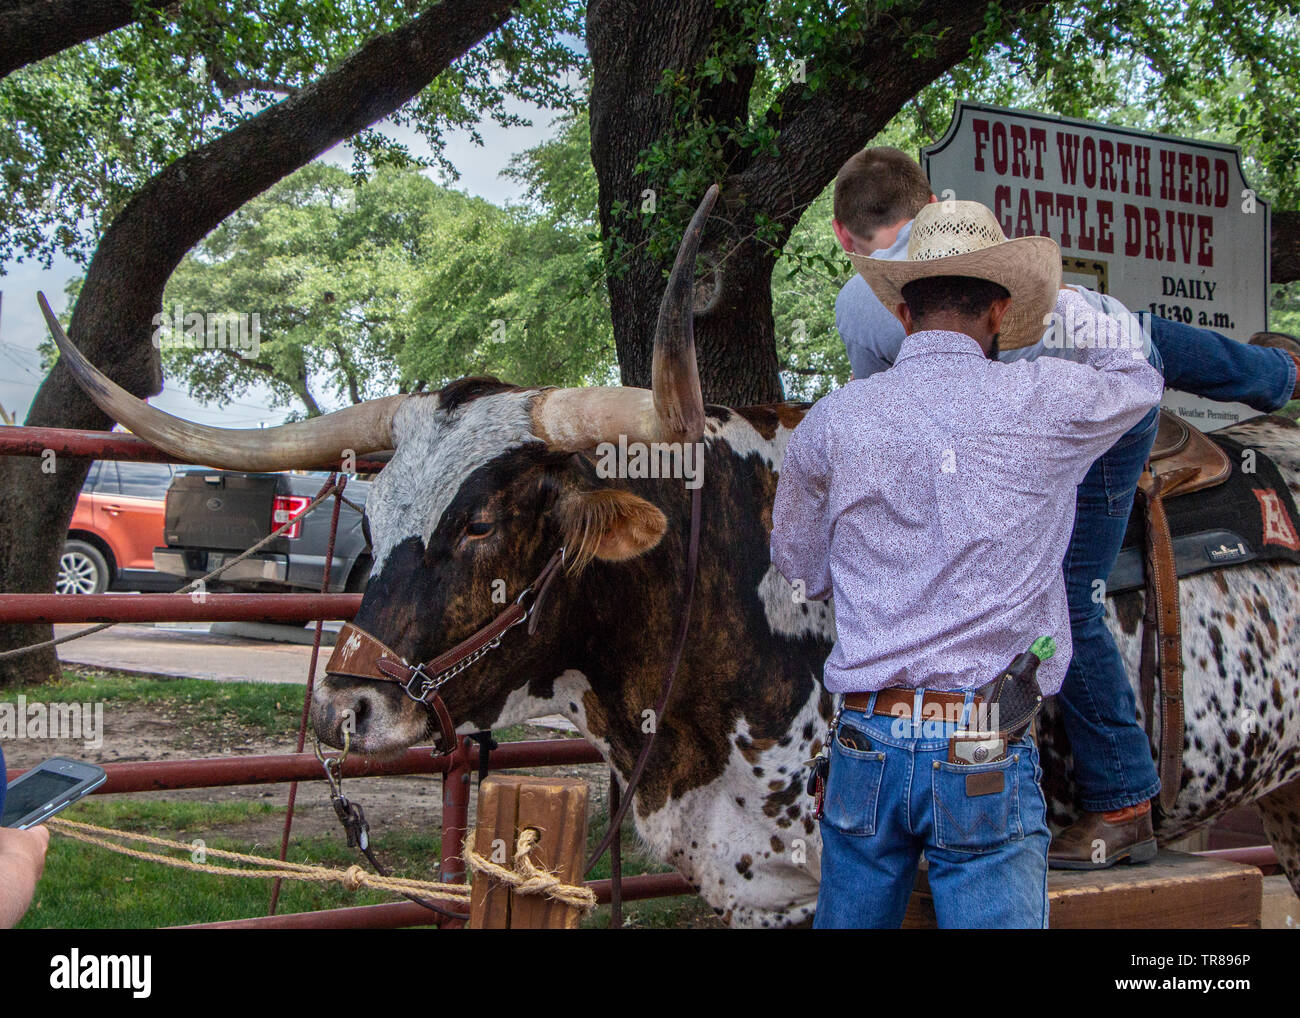 Fort Worth, Texas - MAY 24, 2019:  Stockyards Station long horn cattle for riding and pictures. Stock Photo